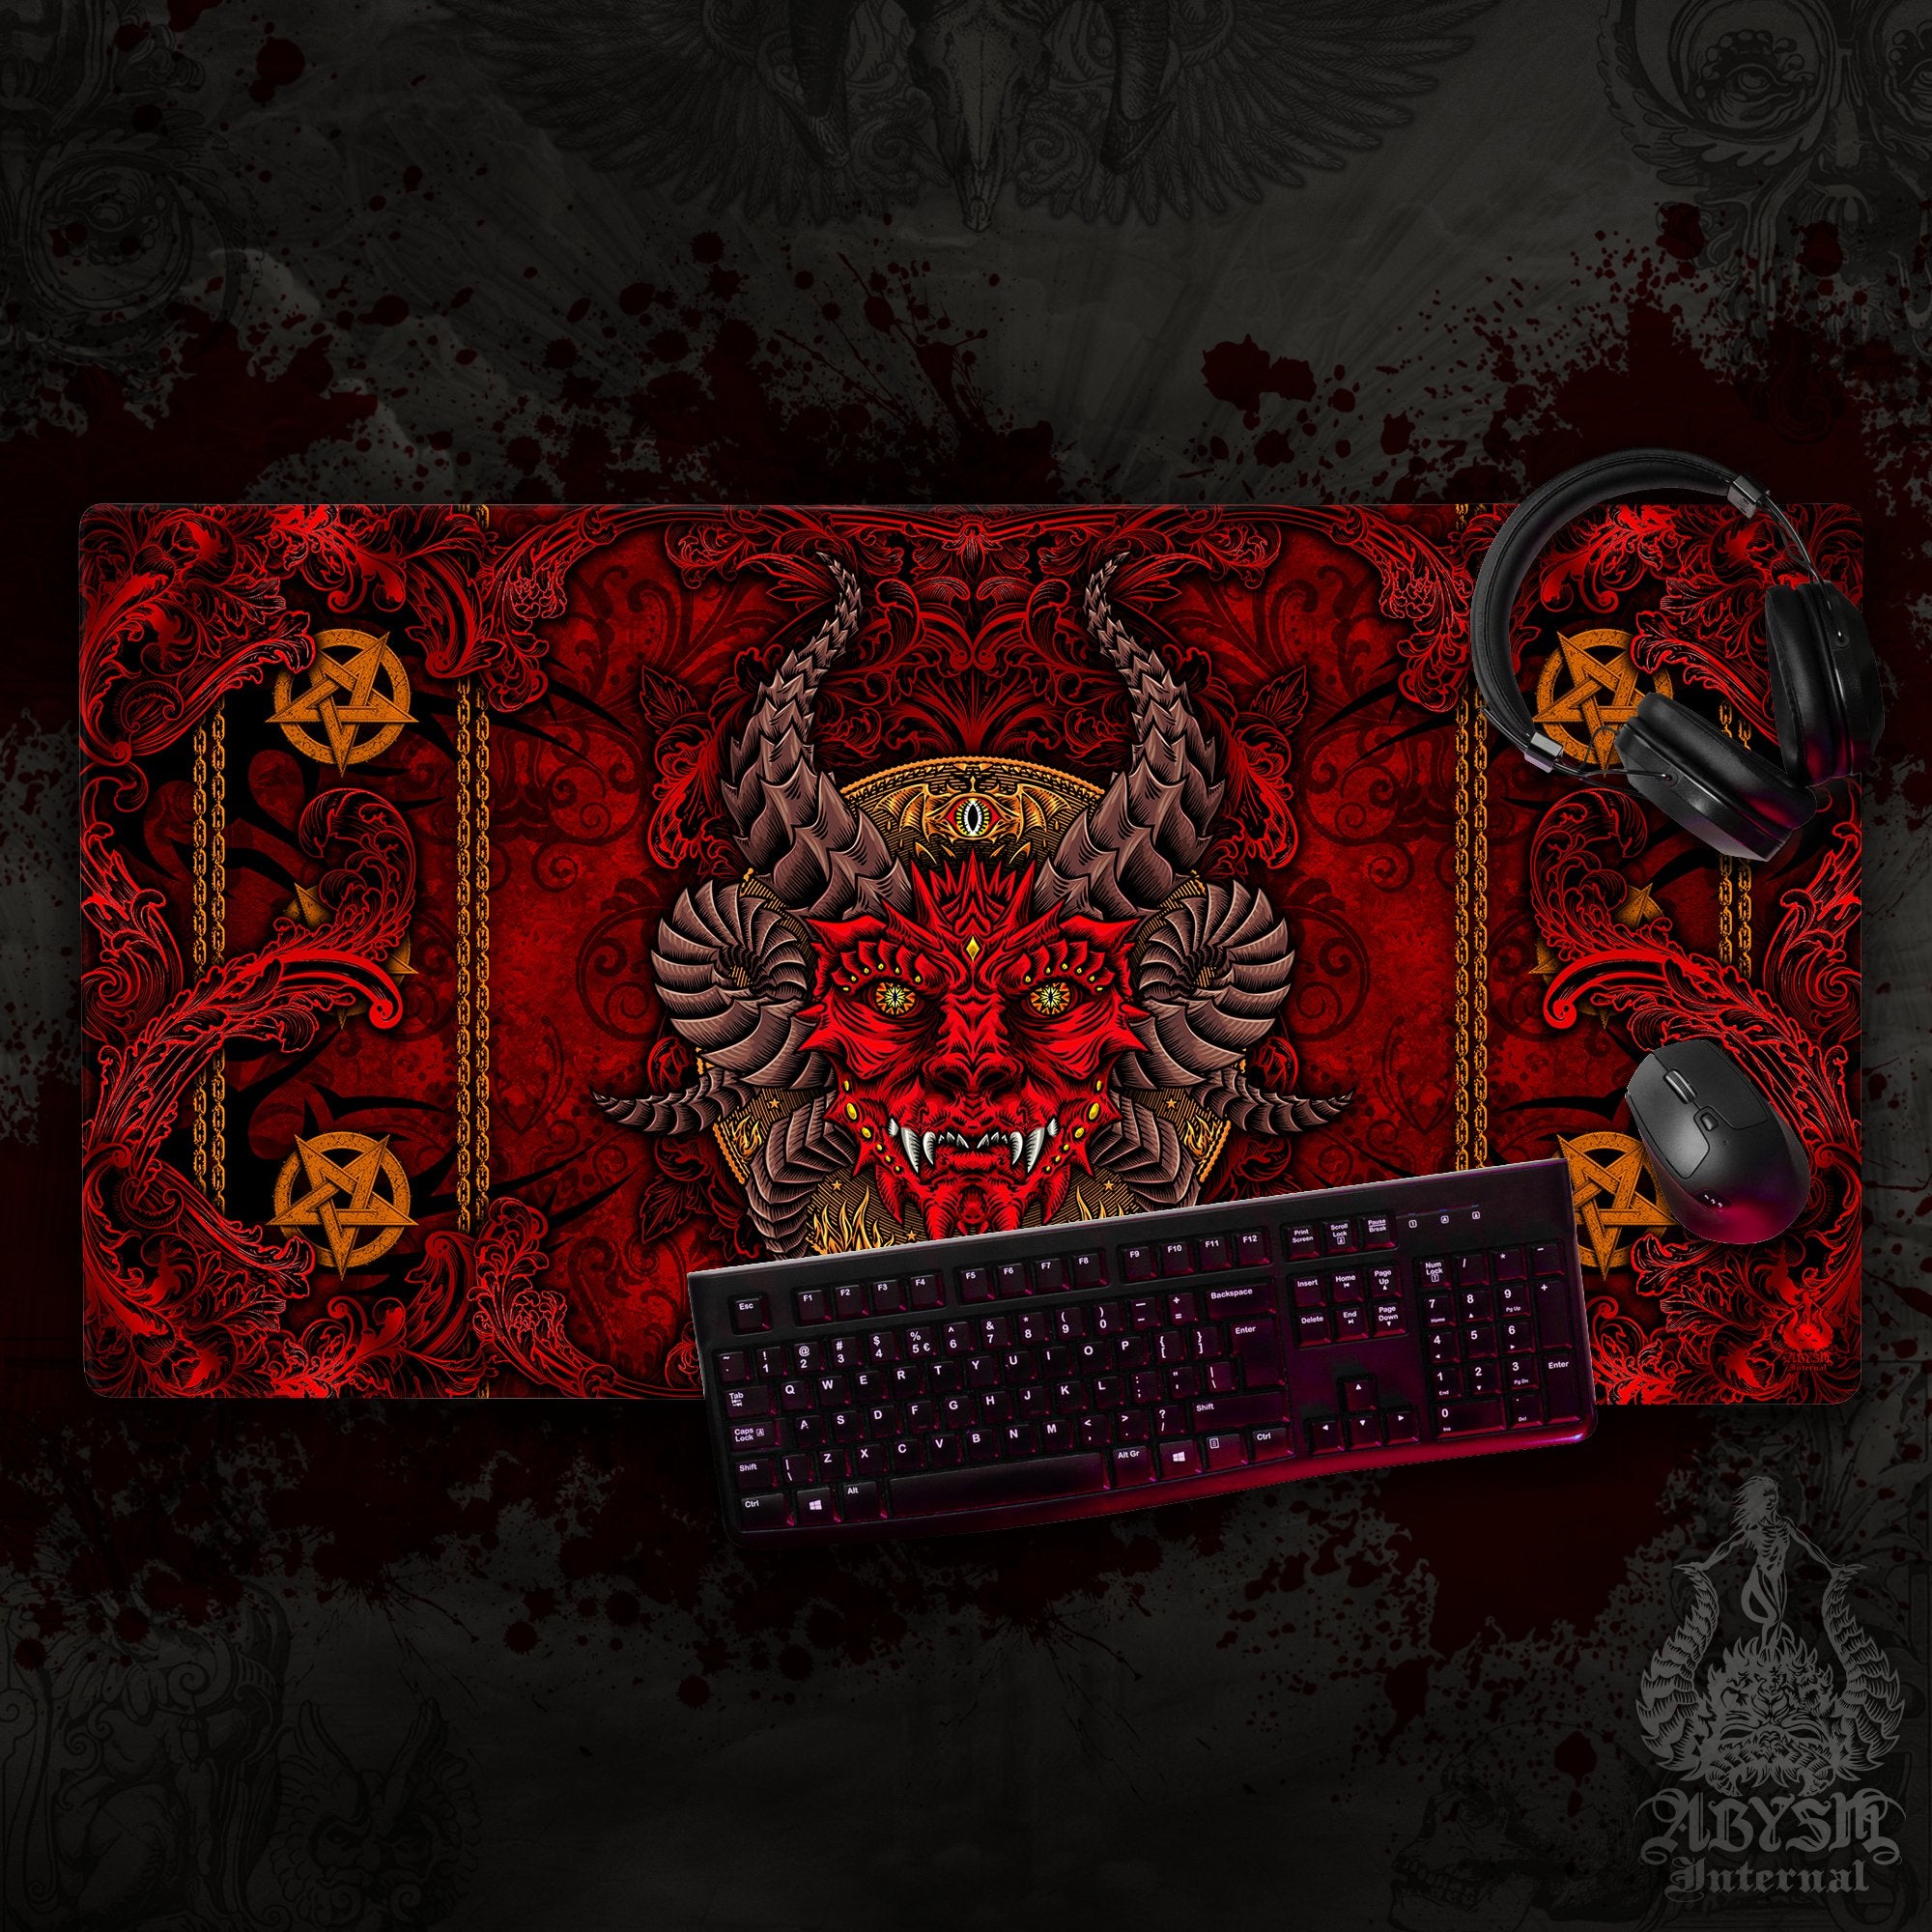 Devil Gaming Mouse Pad, Satanic Desk Mat, Demon Table Protector Cover, Lucifer Workpad, Dark Art Print - Black and Red, 2 Colors - Abysm Internal